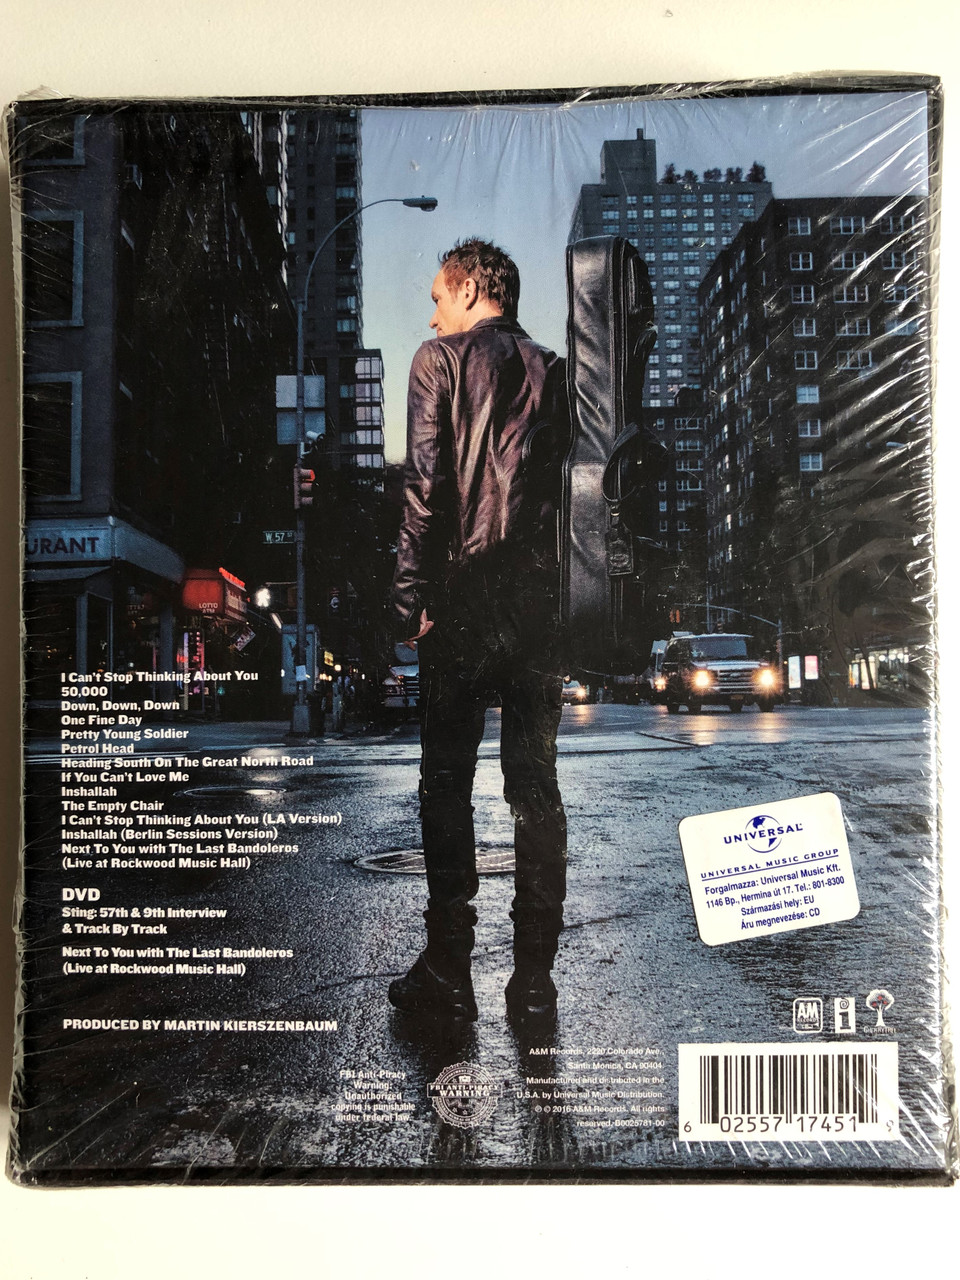 https://cdn10.bigcommerce.com/s-62bdpkt7pb/products/0/images/255898/Sting_57th_9th_Super_Deluxe_Strings_First_RockPop_Album_In_Over_A_Decade_Includes_3_Bonus_Tracks_Liner_Notes_Penned_By_Sting_Exclusive_DVD_Collectible_Prints_AM_Records_Audio_C__94604.1665496600.1280.1280.JPG?c=2&_gl=1*isnarb*_ga*MjA2NTIxMjE2MC4xNTkwNTEyNTMy*_ga_WS2VZYPC6G*MTY2NTQ5NDYwOS41ODkuMS4xNjY1NDk2NTE3LjYwLjAuMA..